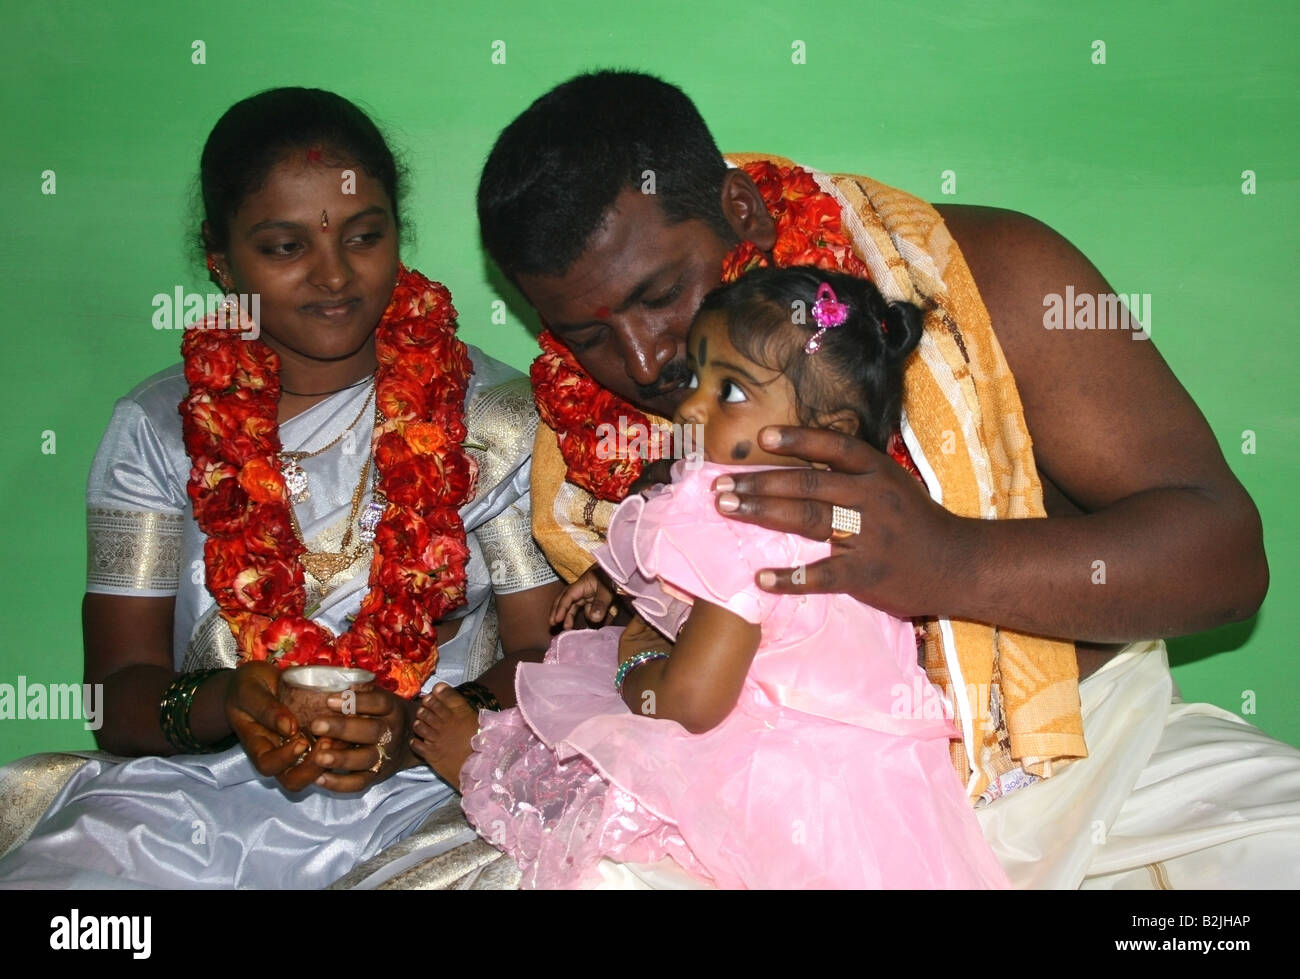 parents-carrying-out-namakaran-naming-ceremony-ritual-father-whispers-B2JHAP.jpg